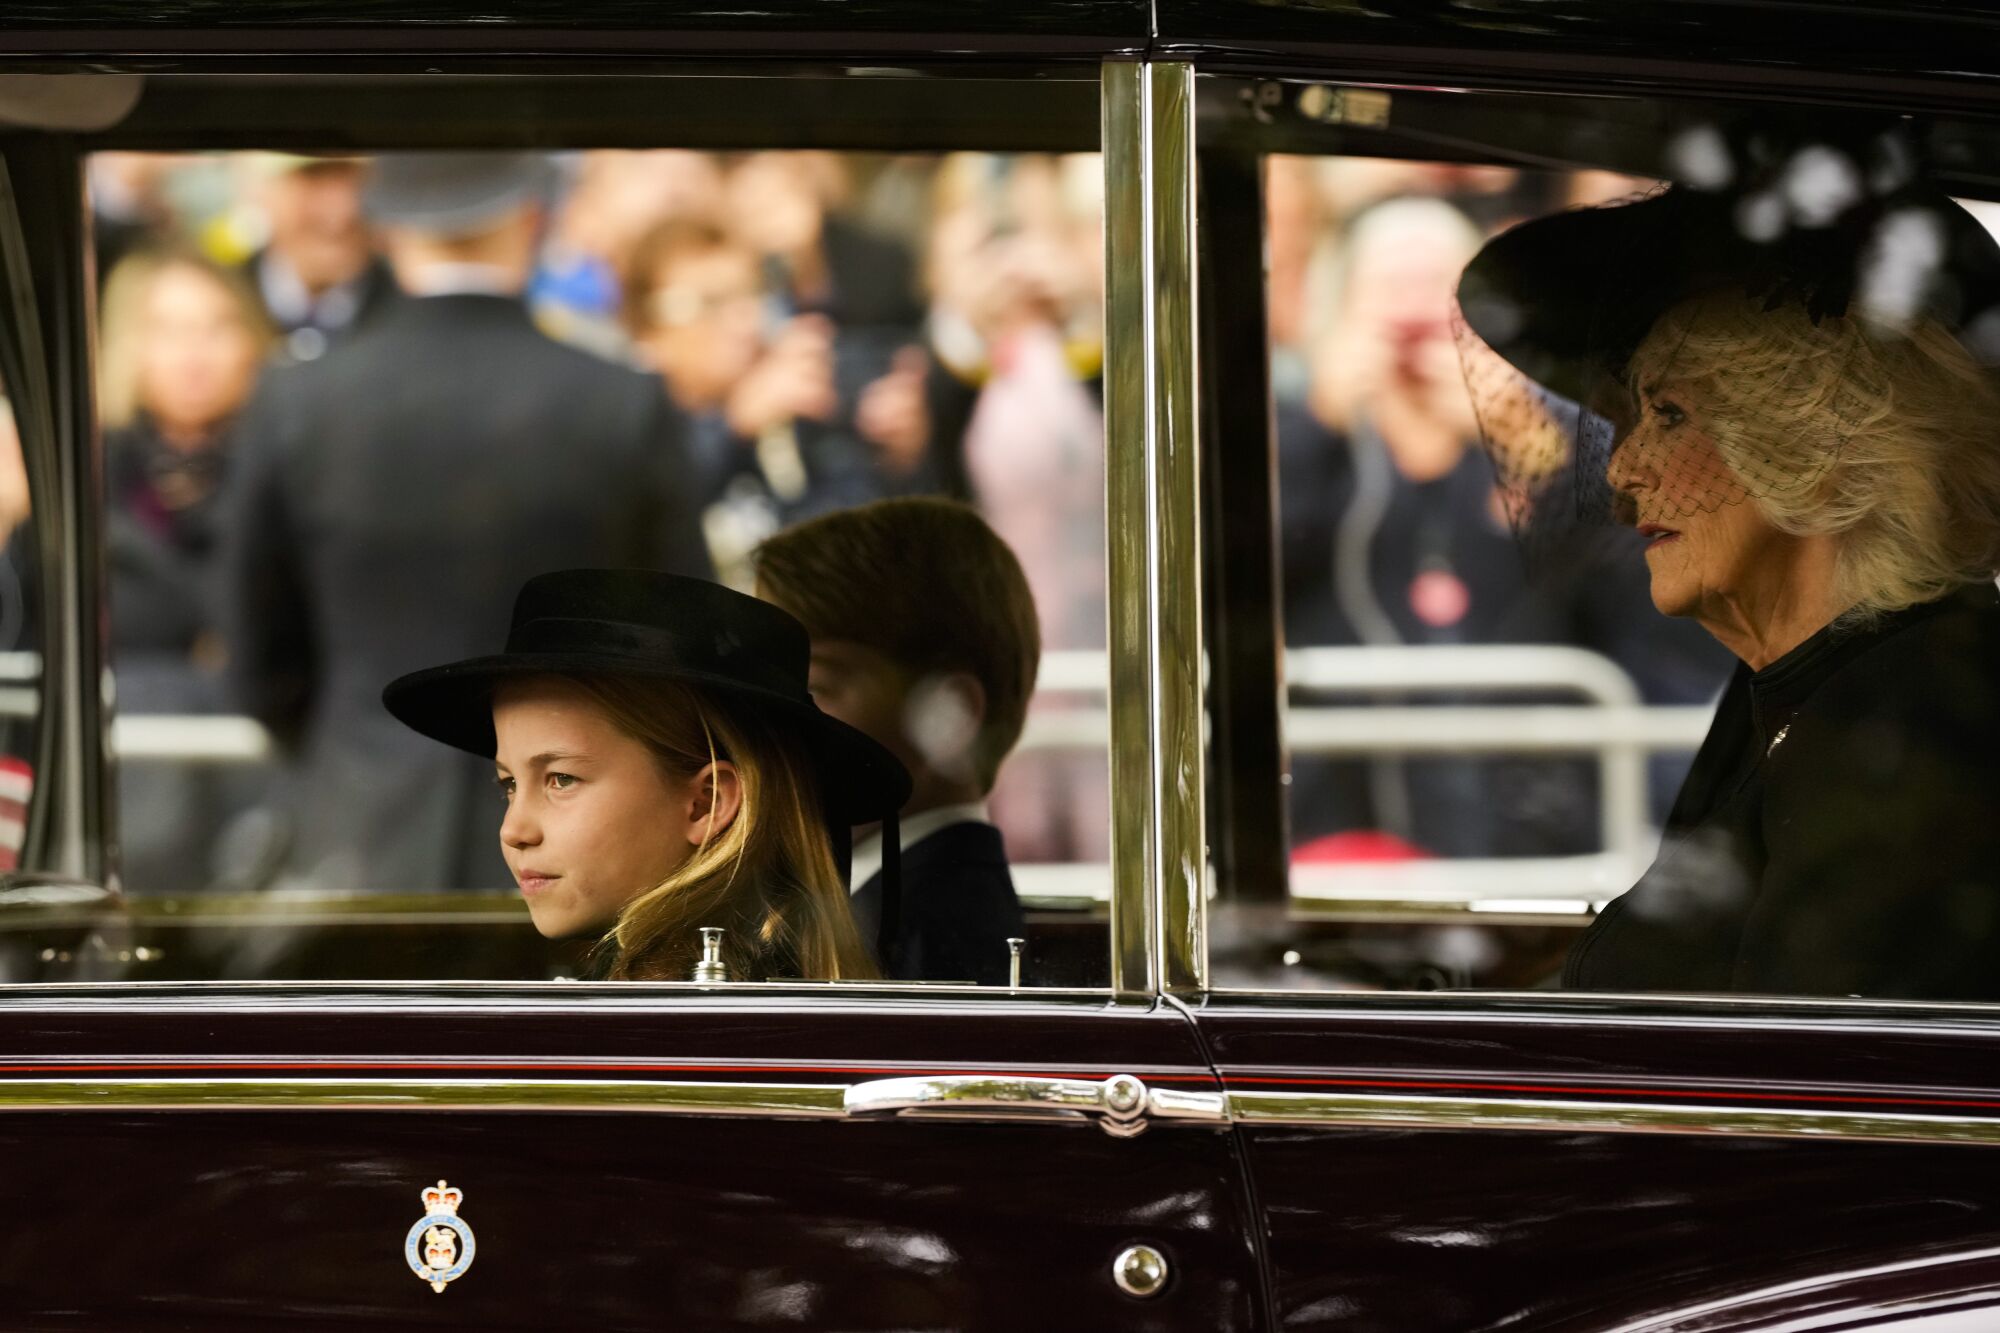     Prince Charlotte and Prince George get into the car with the Queen Consort, Camilla.